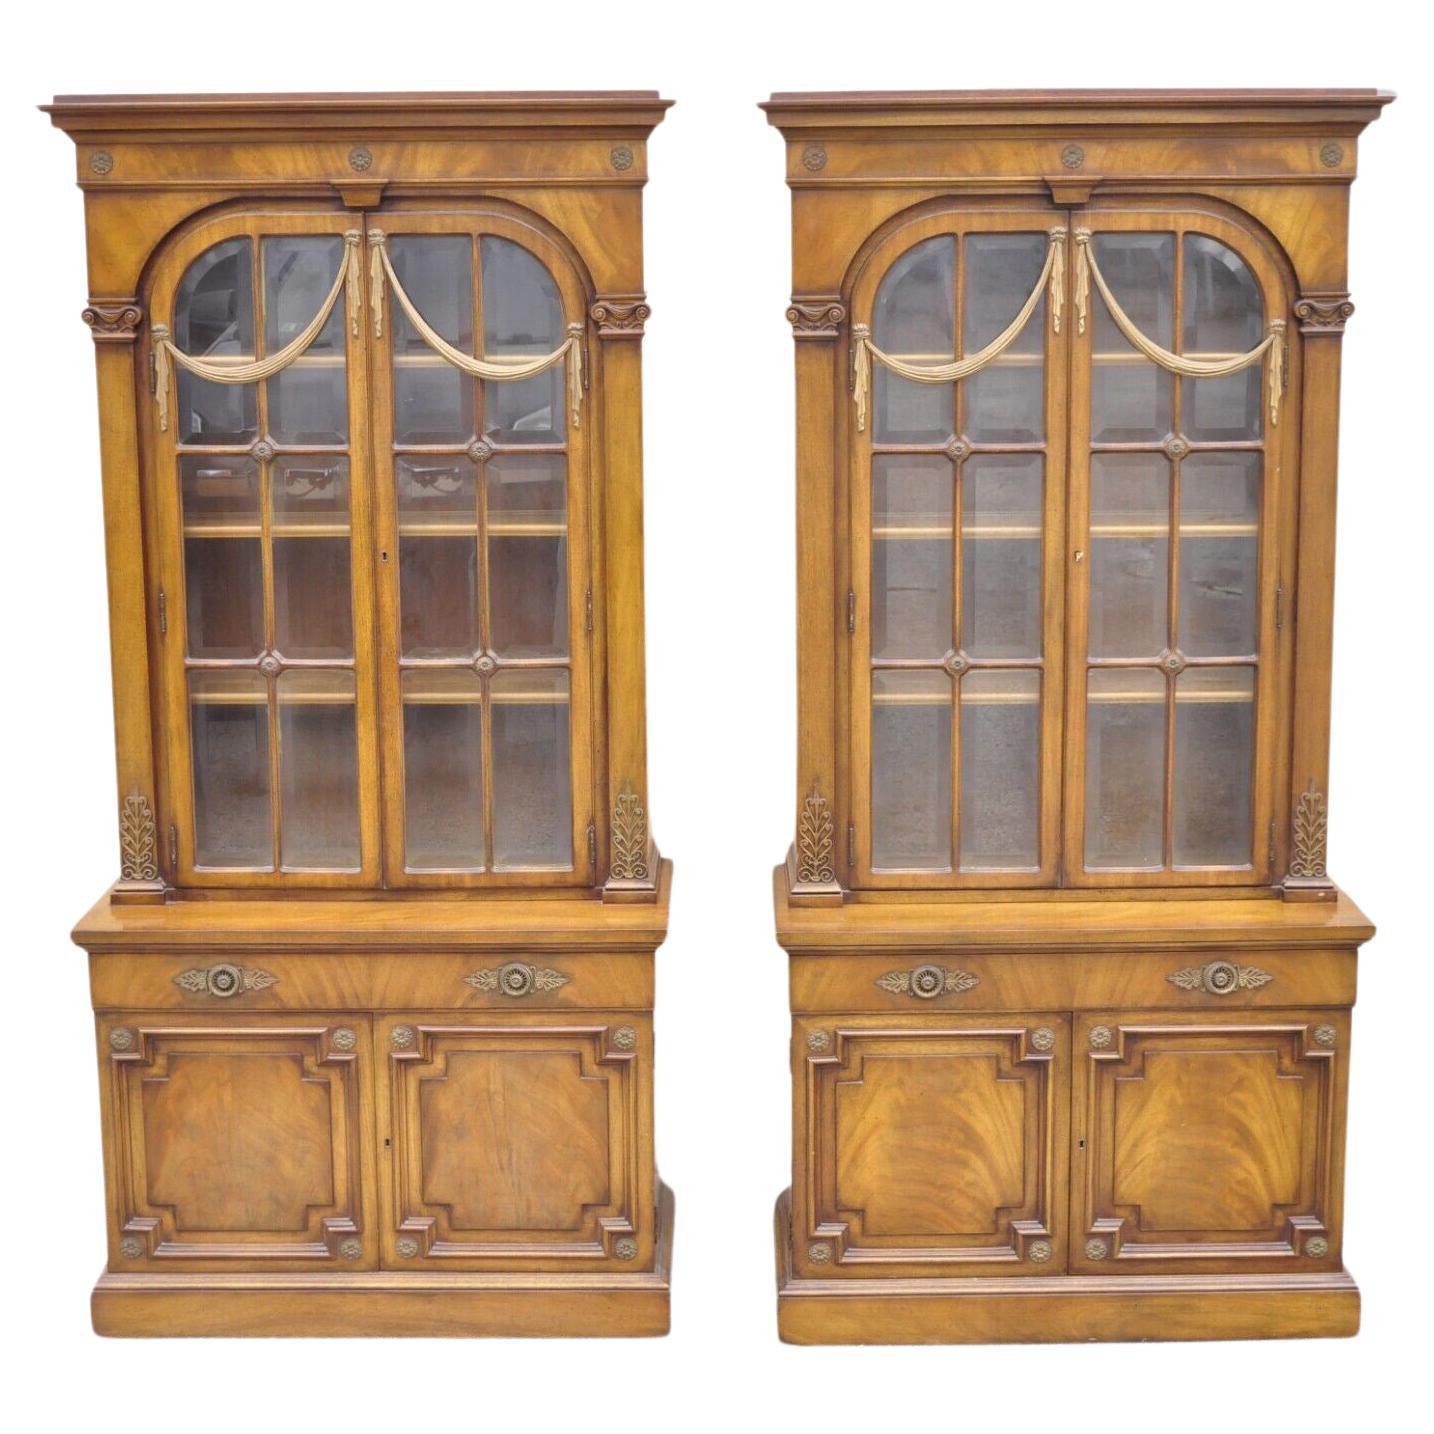 Karges French Neoclassical Style Regency Mahogany Curio China Cabinet, a Pair